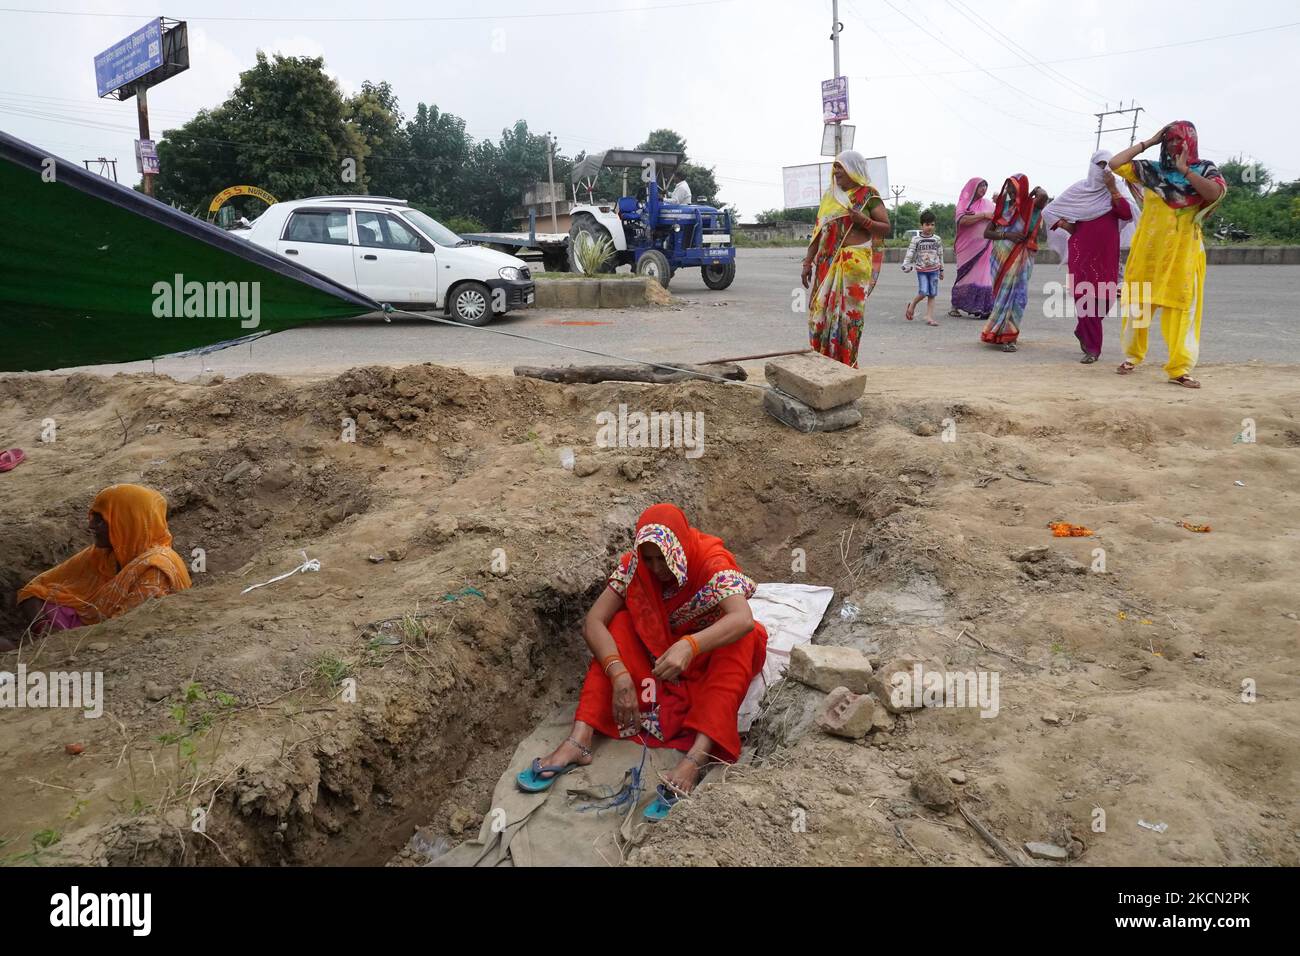 Women sit inside graves as farmers stage 'Zameen Samadhi' protest over three farm laws and an increase in land compensation, at Ghaziabad's Mandola village in the northern state of Uttar Pradesh, India on September 21, 2021. (Photo by Mayank Makhija/NurPhoto) Stock Photo